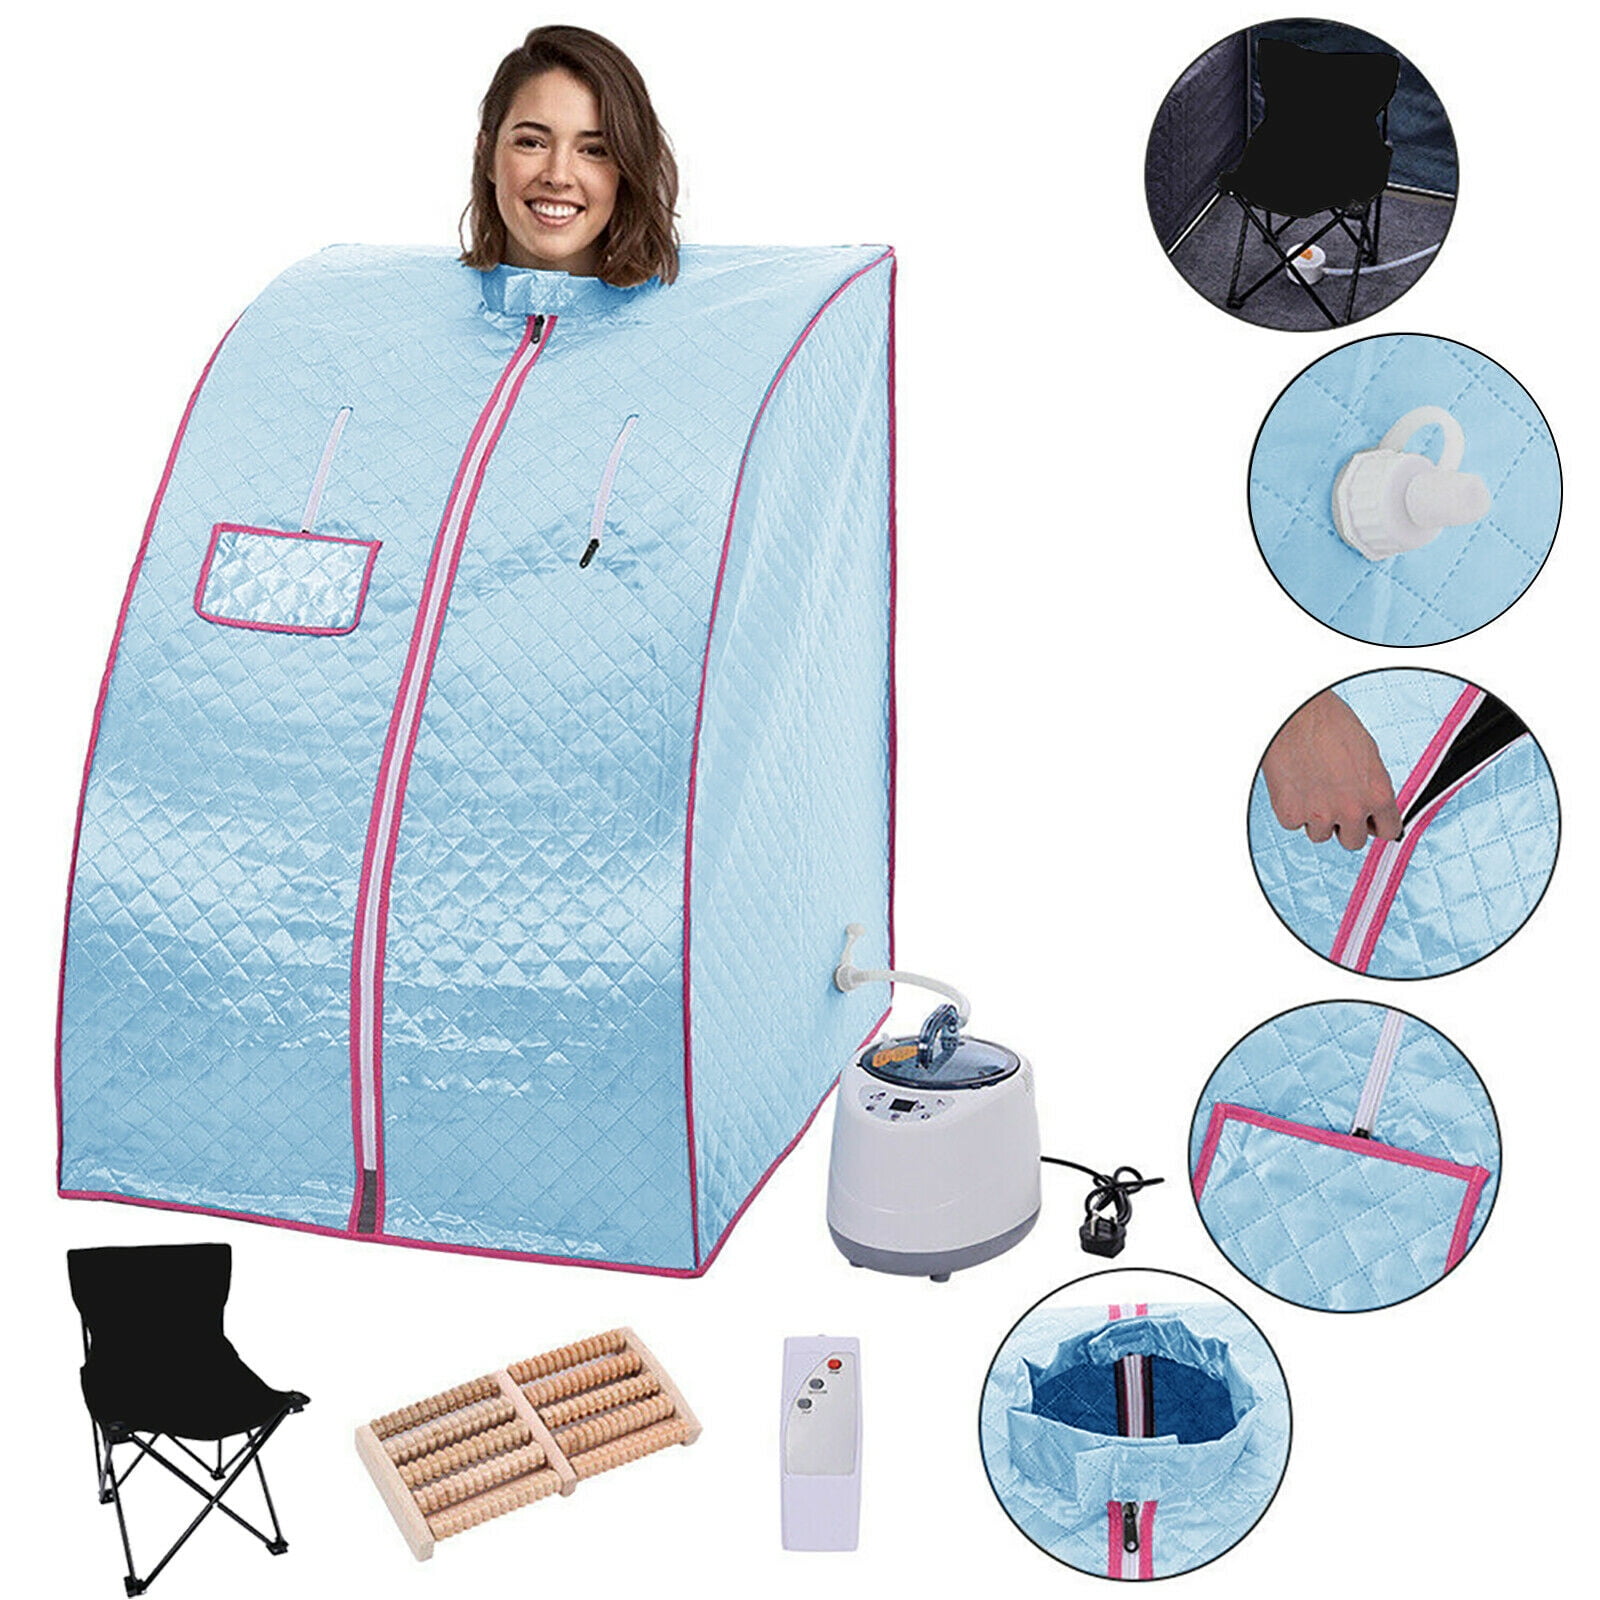 Details about   Portable Steam Sauna Home Full Body Spa Tent Steamer Weight Loss Detox 2 B e 72 